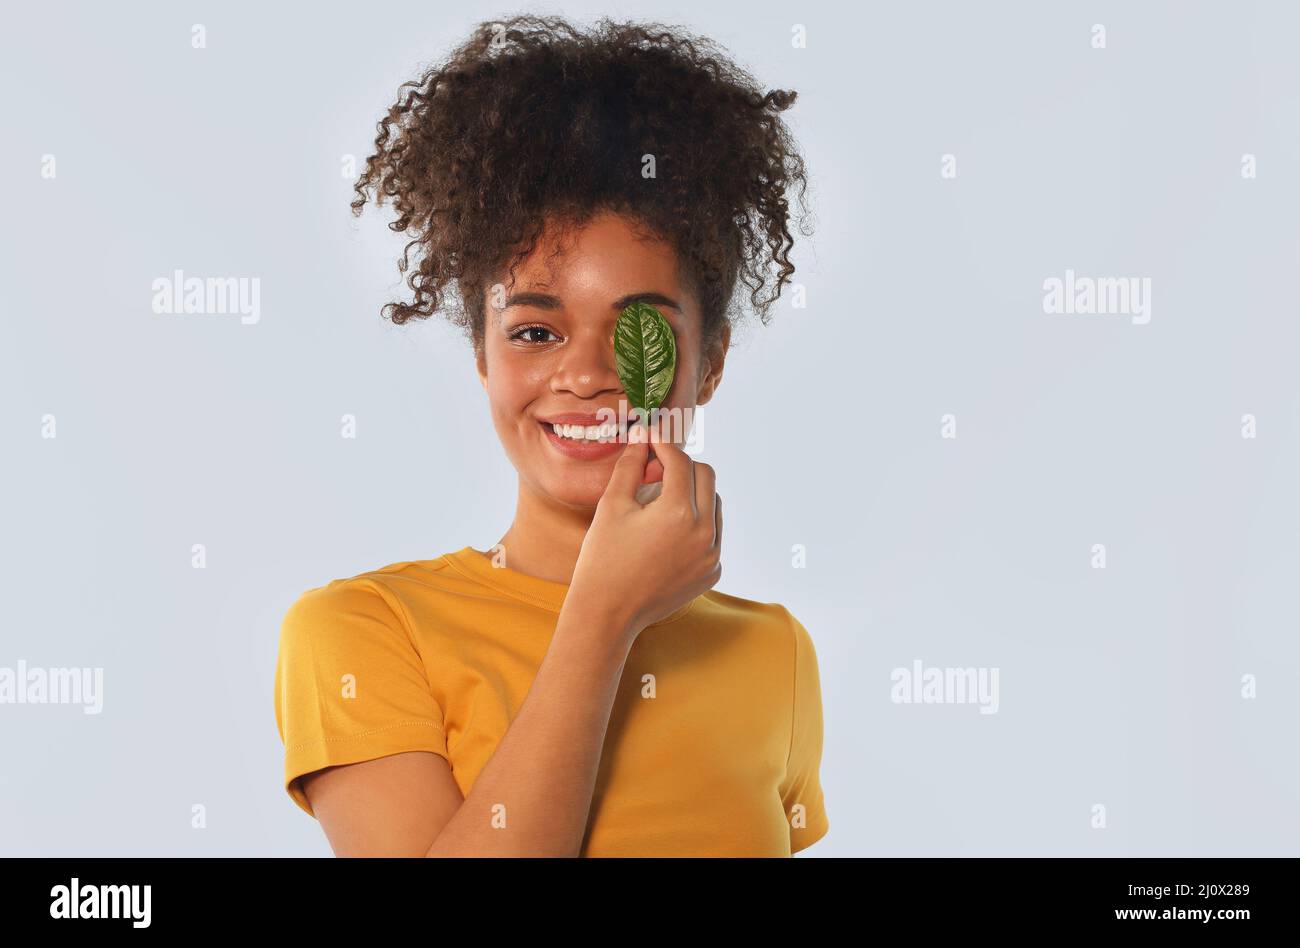 Happy Afro american girl in yellow tshirt with curly hair covering one eye with green leaf Stock Photo